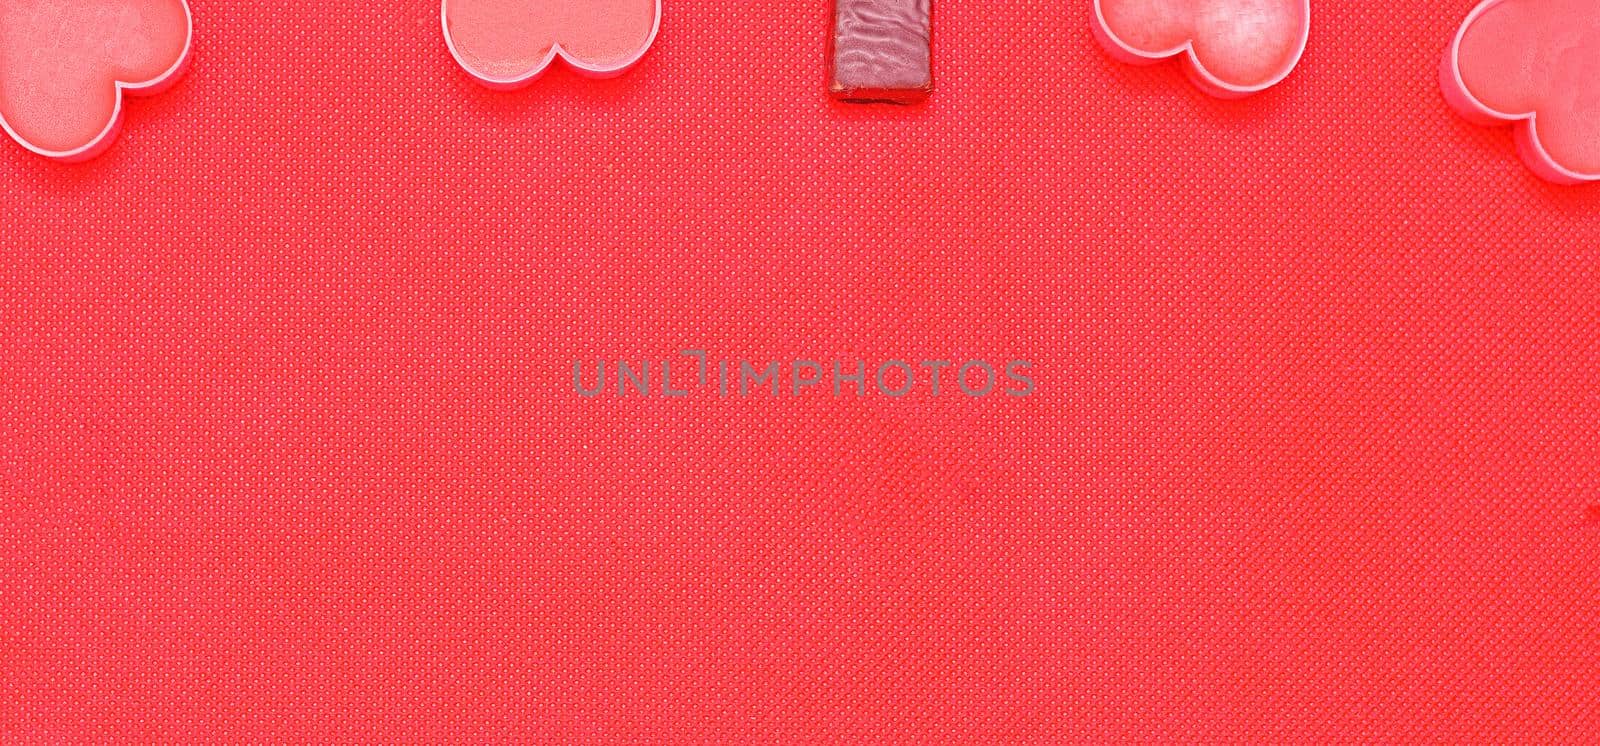 Happy valentines day.Pink romantic hearts and chocolate candies on pink background.Romantic Valentine day background.